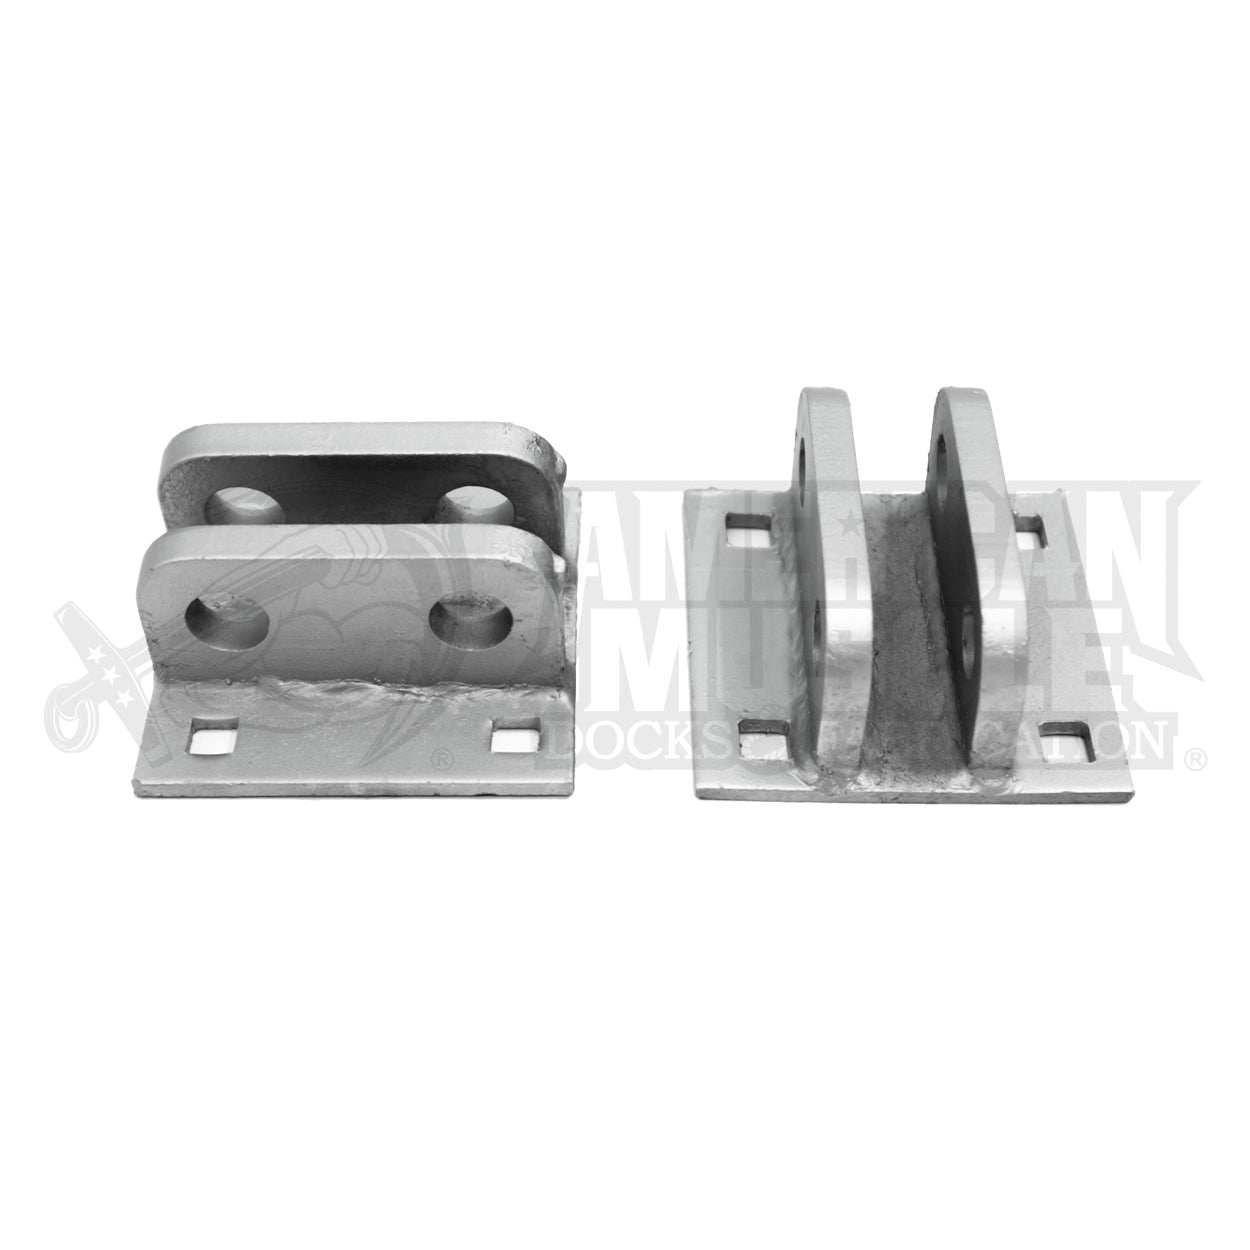 Bilco RPRS12SS 2-Piece Bracket Hinge with Pin - Stainless Steel